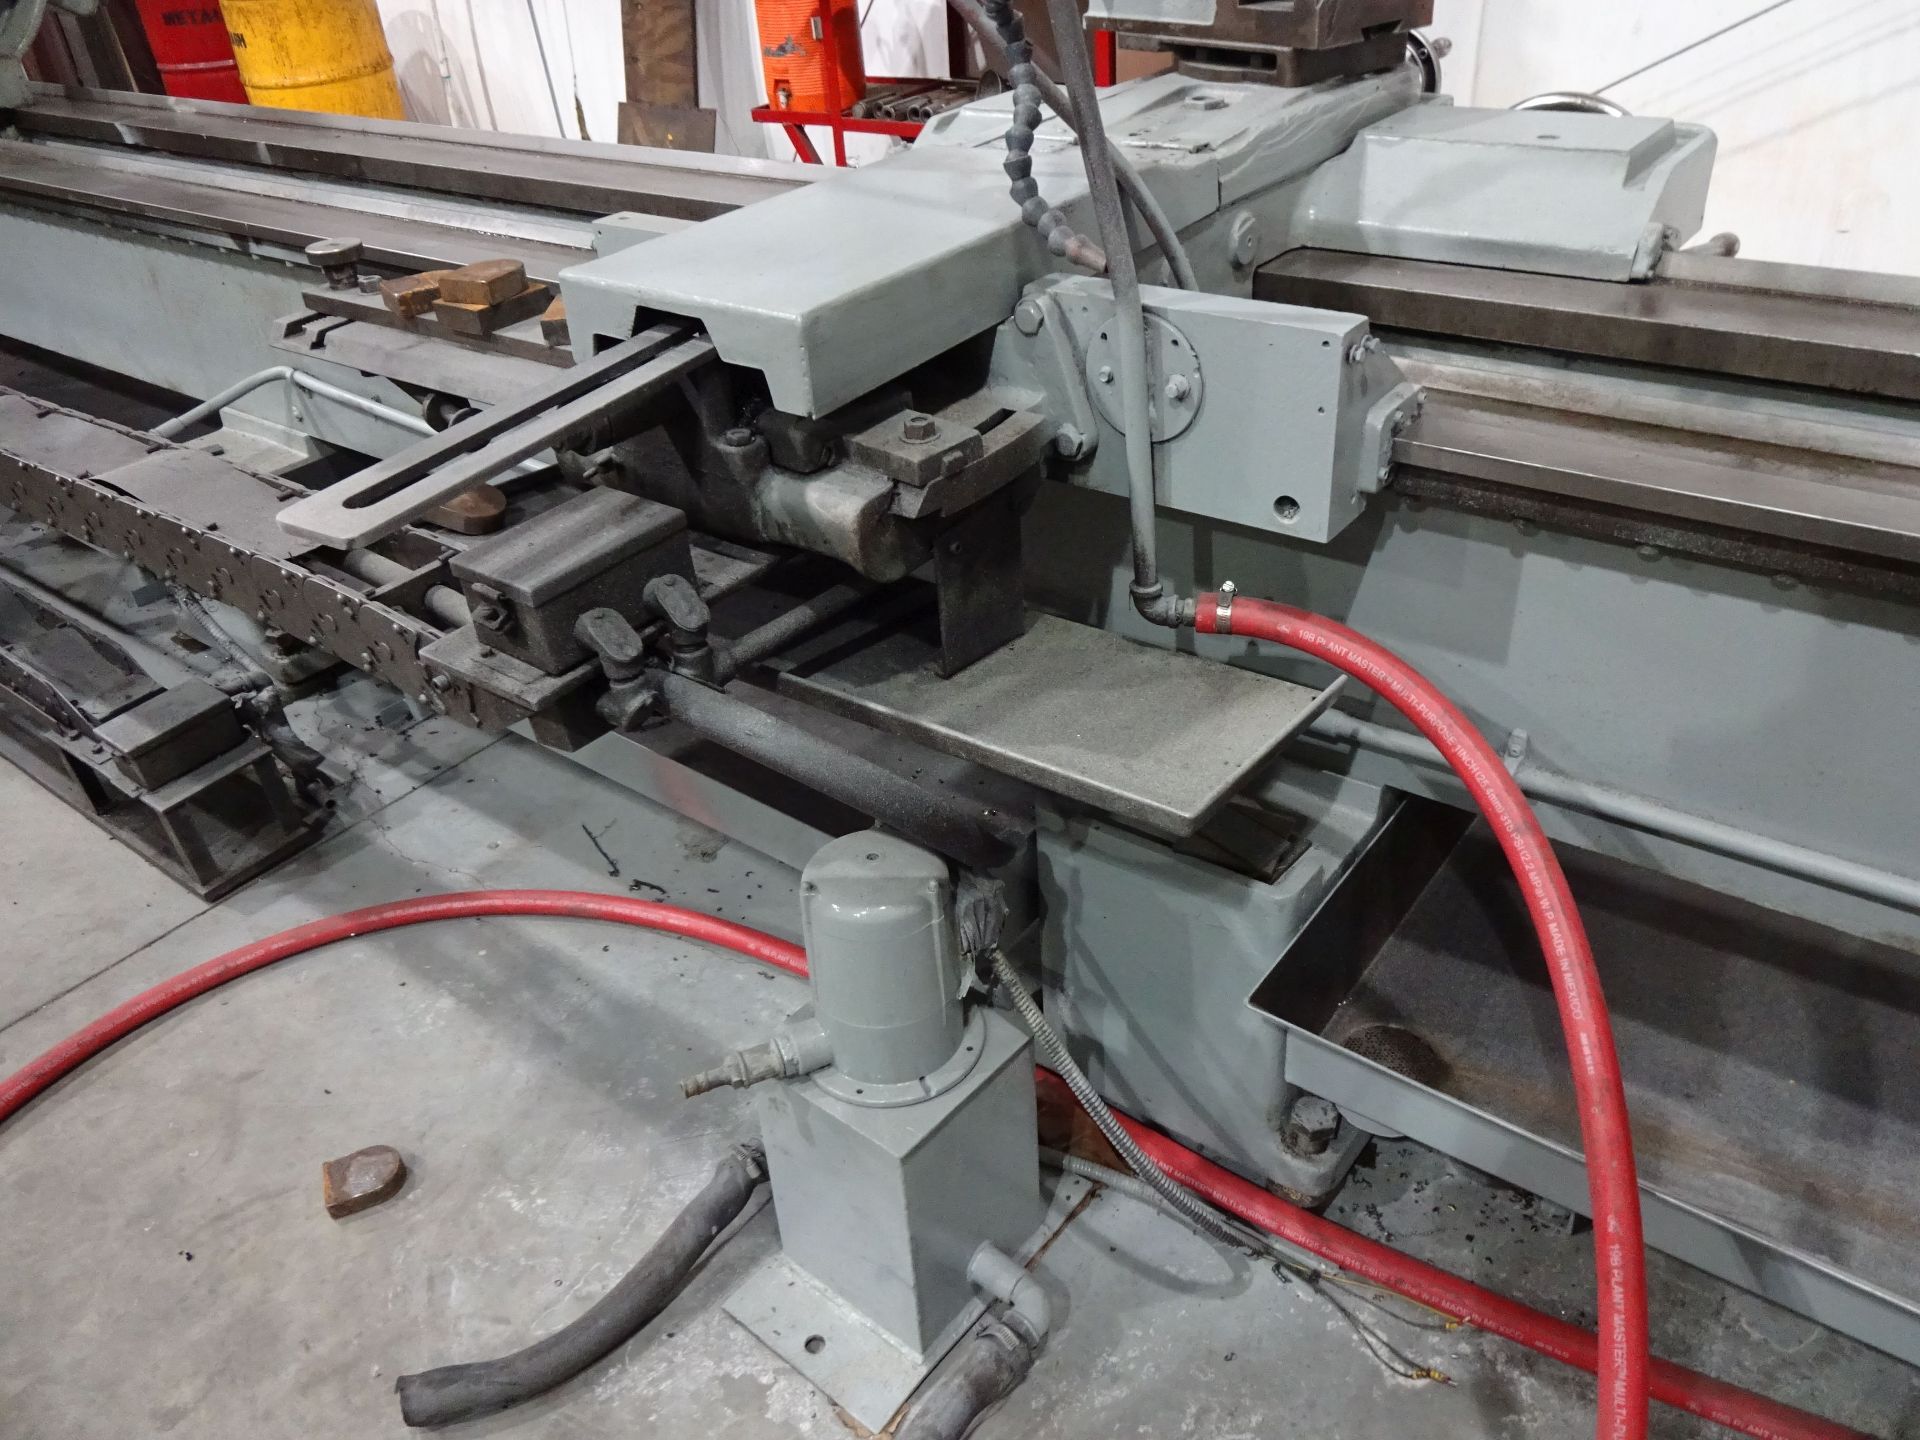 25" X 275" LEBLOND HEAVY DUTY 2516 ENGINE LATHE; S/N 3NFL1284, 20" CHUCK, 25" SWING OVER BED, 16" - Image 25 of 29